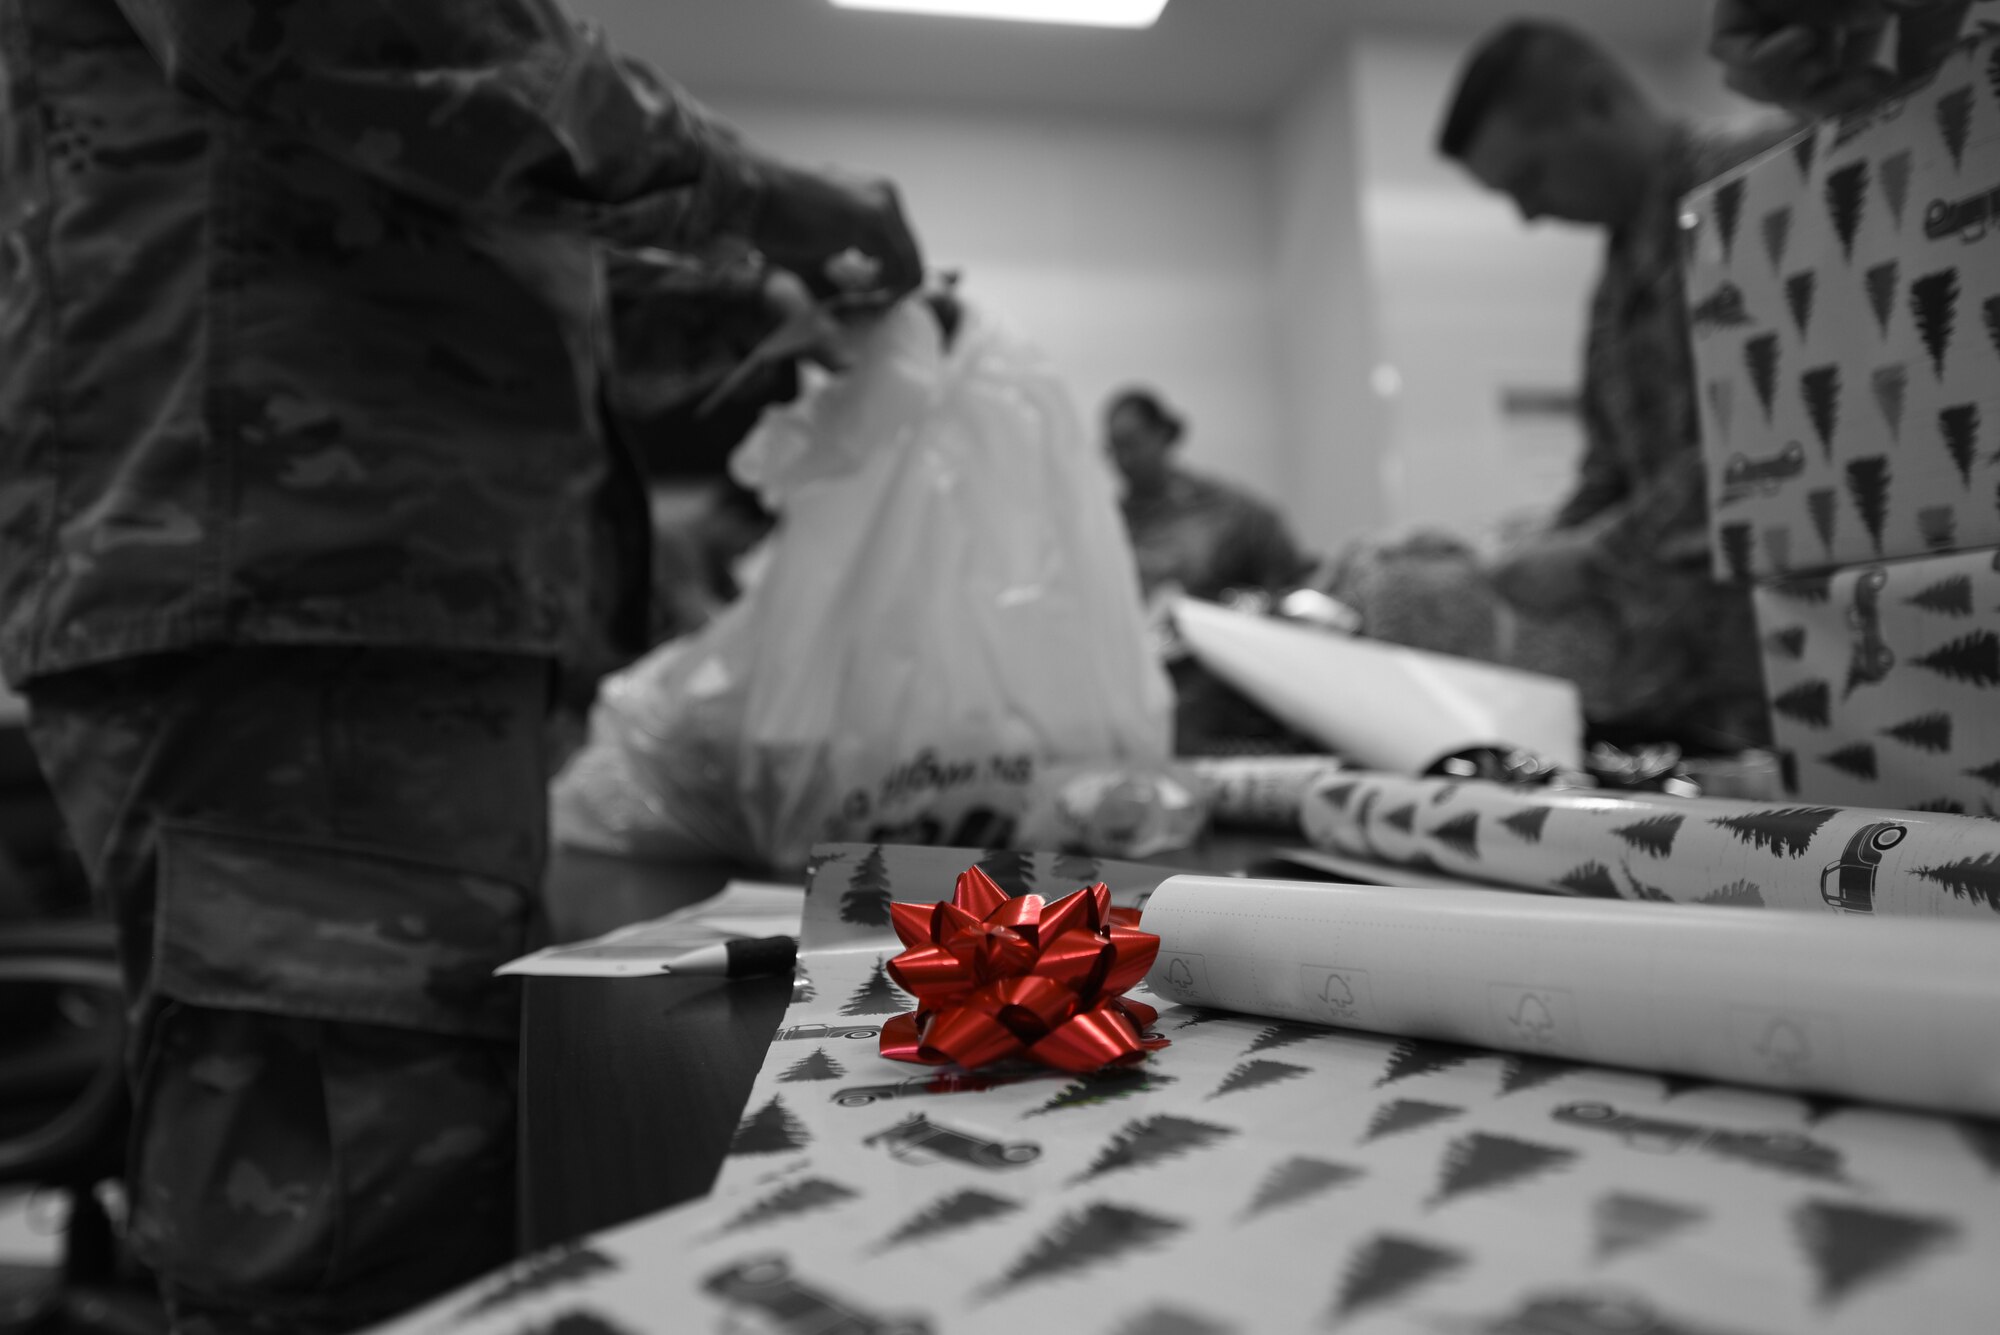 Airmen wrap holiday gifts